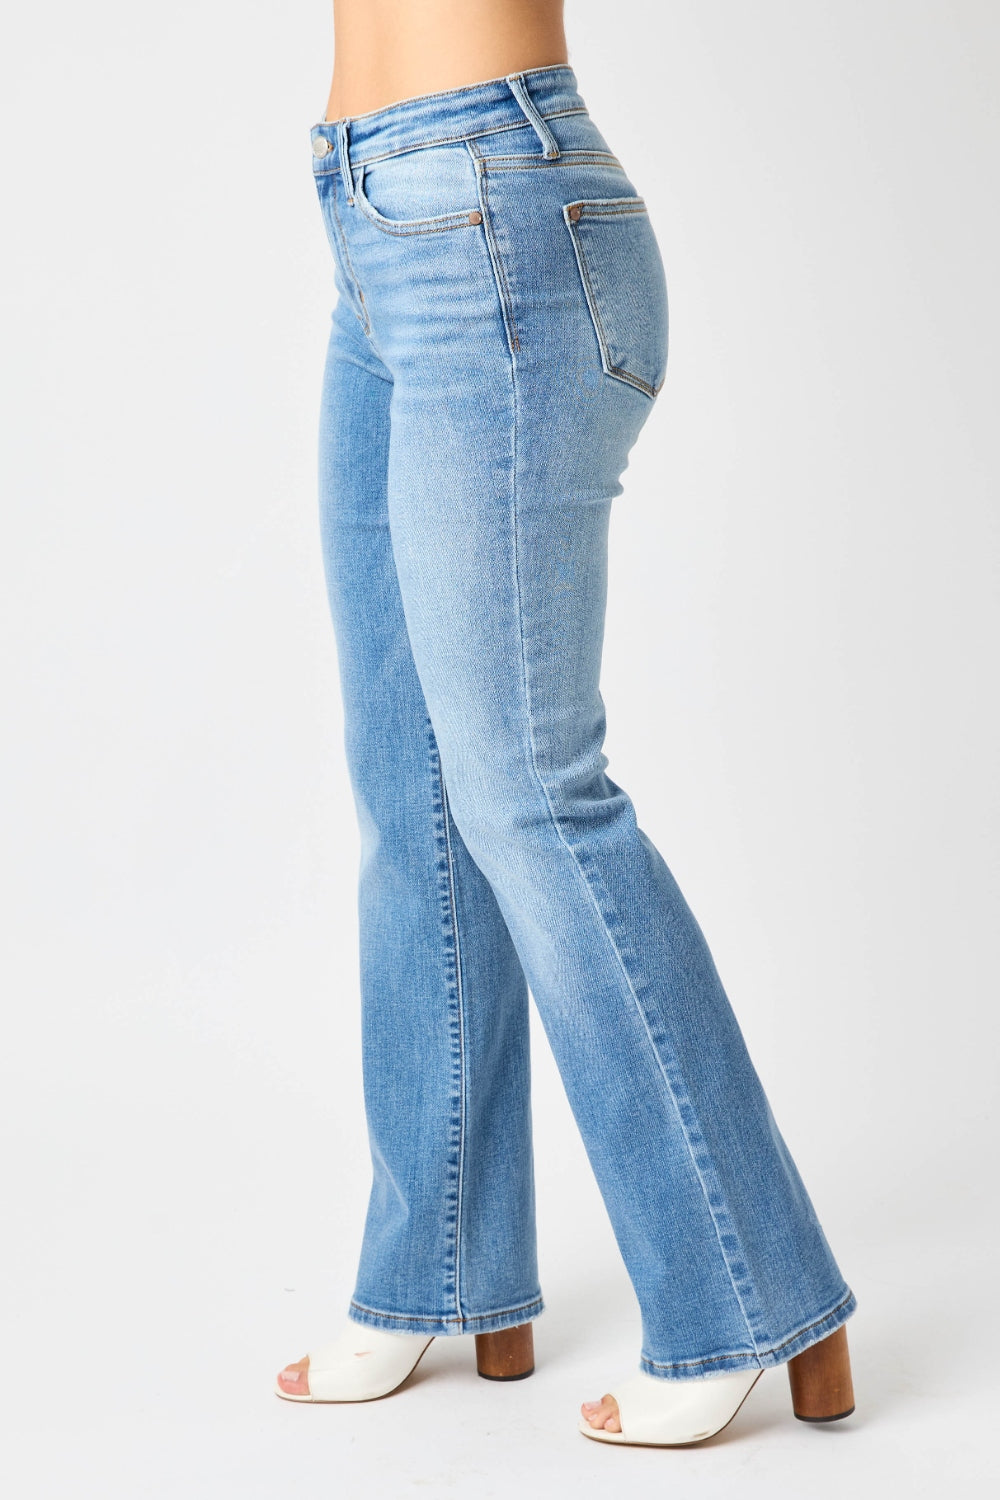 Side VIew, Judy Blue, Mid Rise Vintage Bootcut Jeans